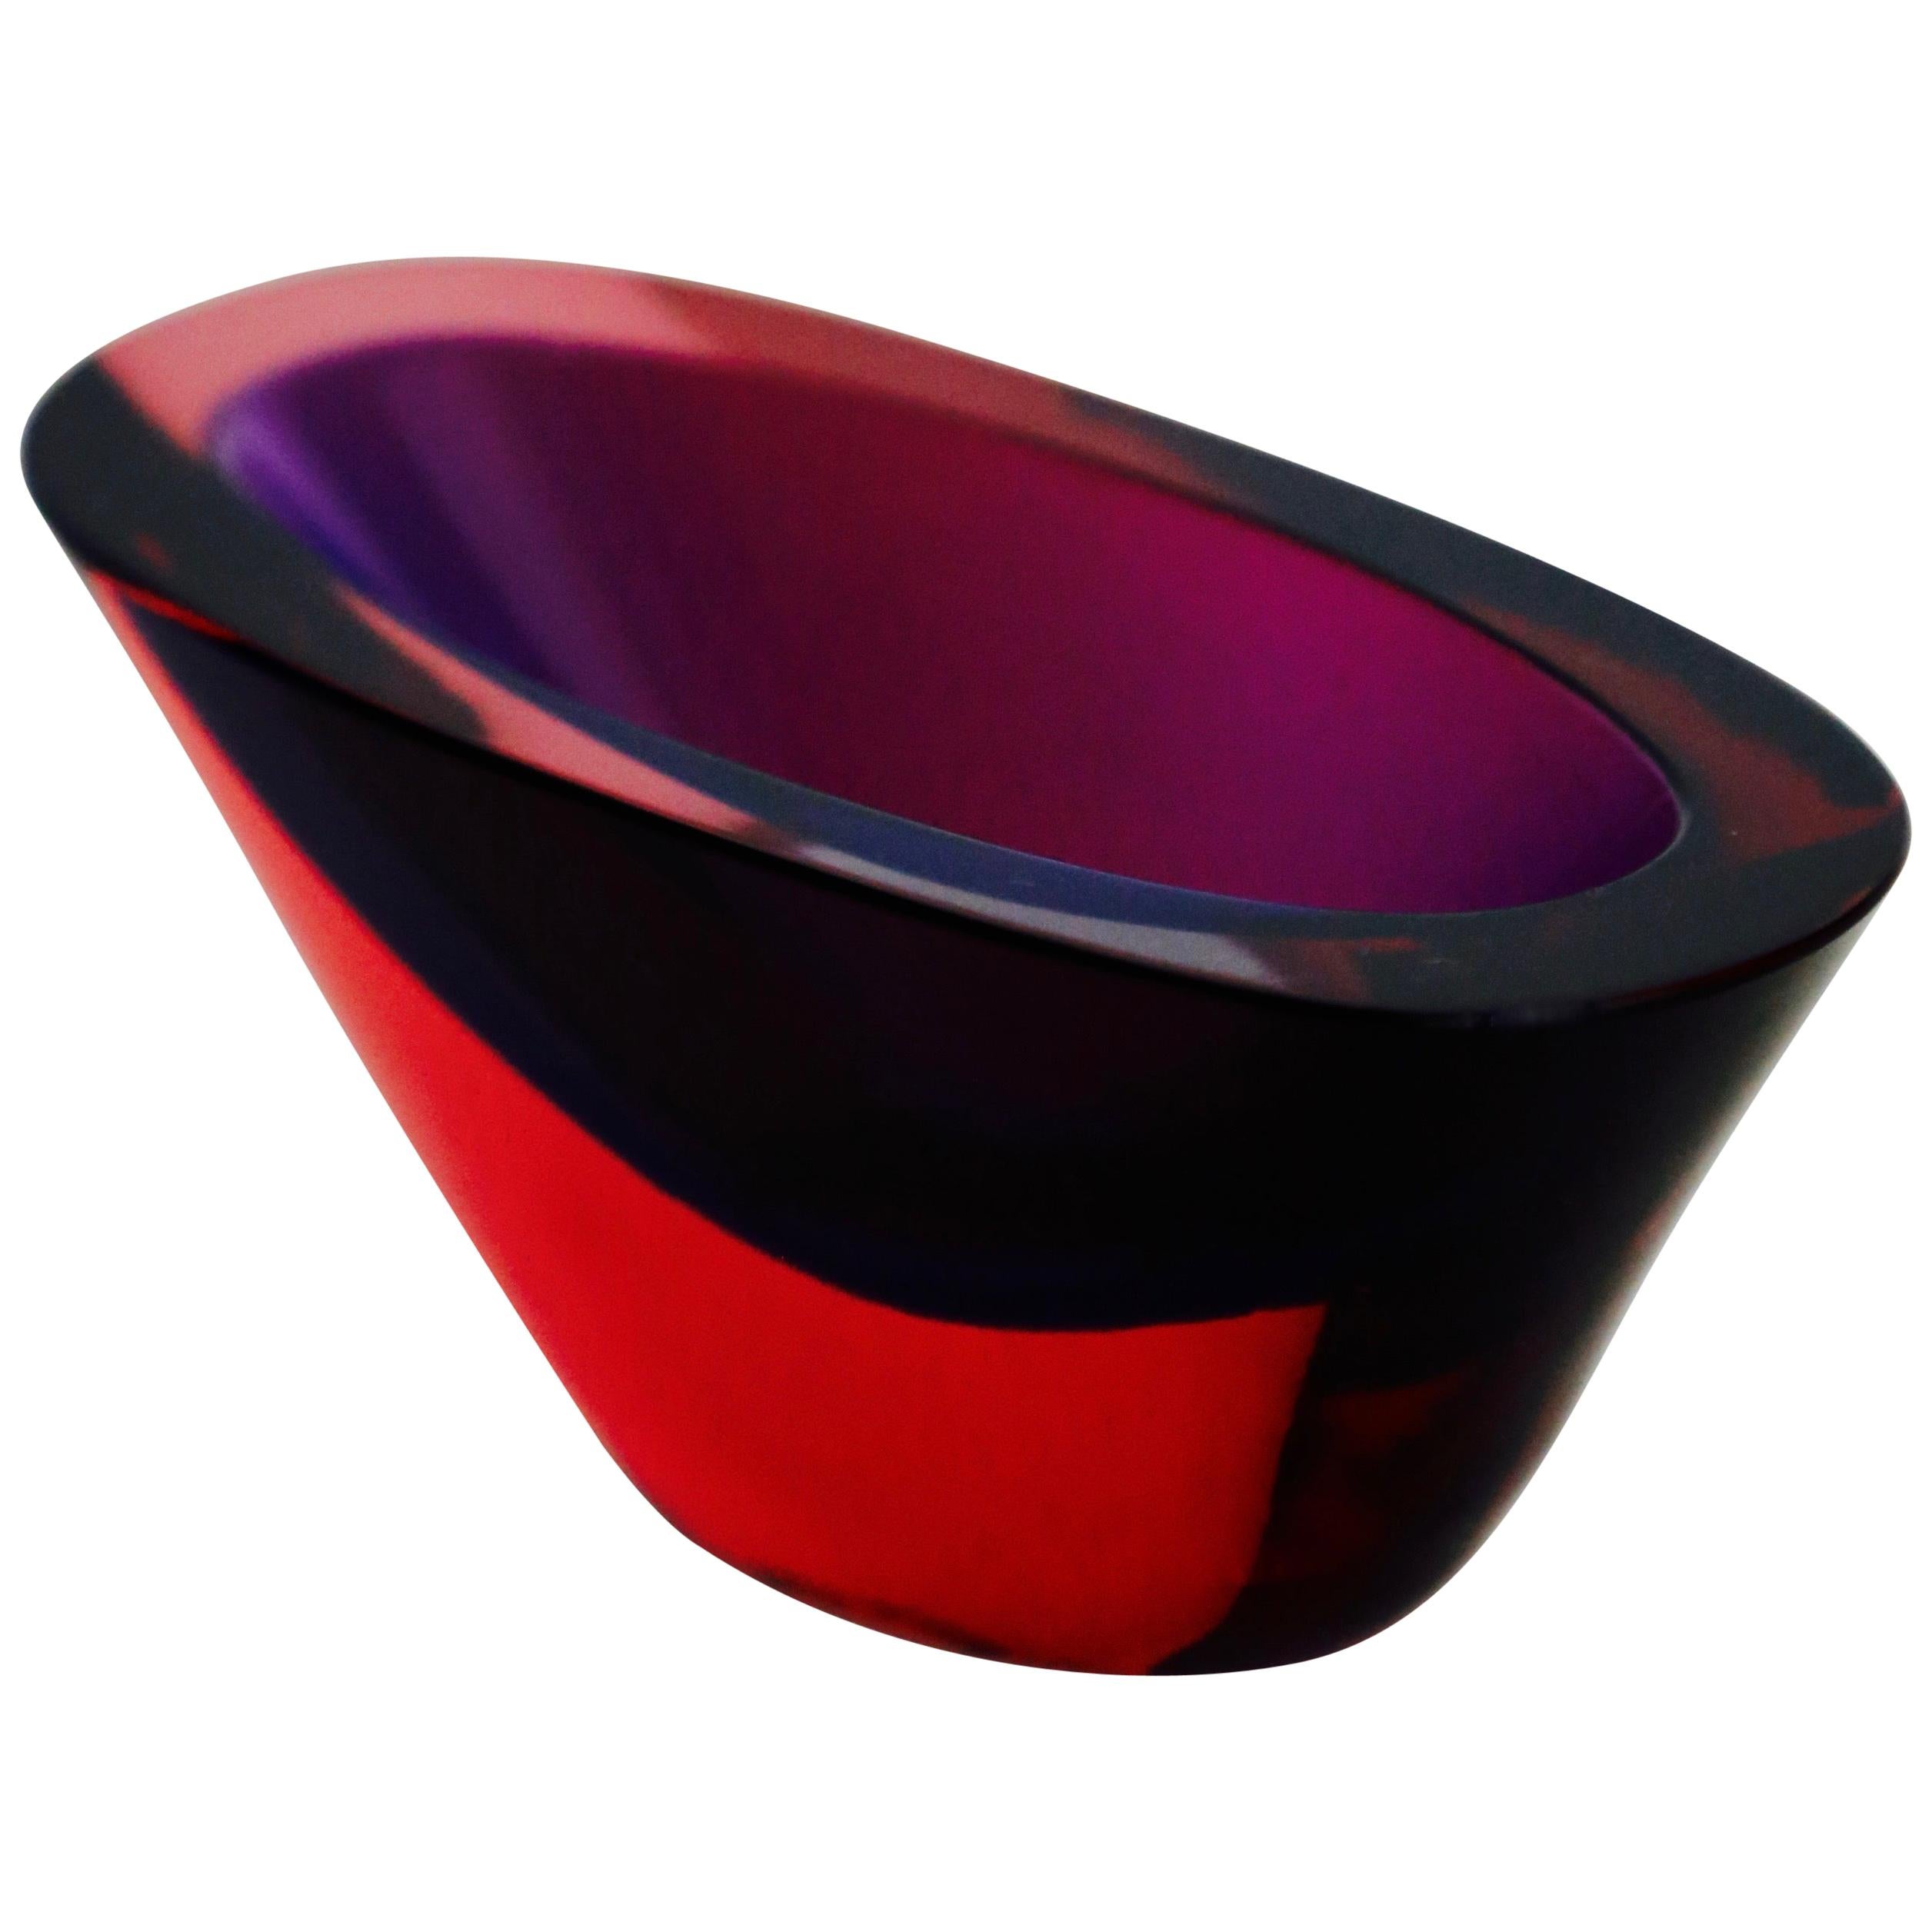 Red purple blue small Sommerso vase by Flavio Poli.
Perfect condition.